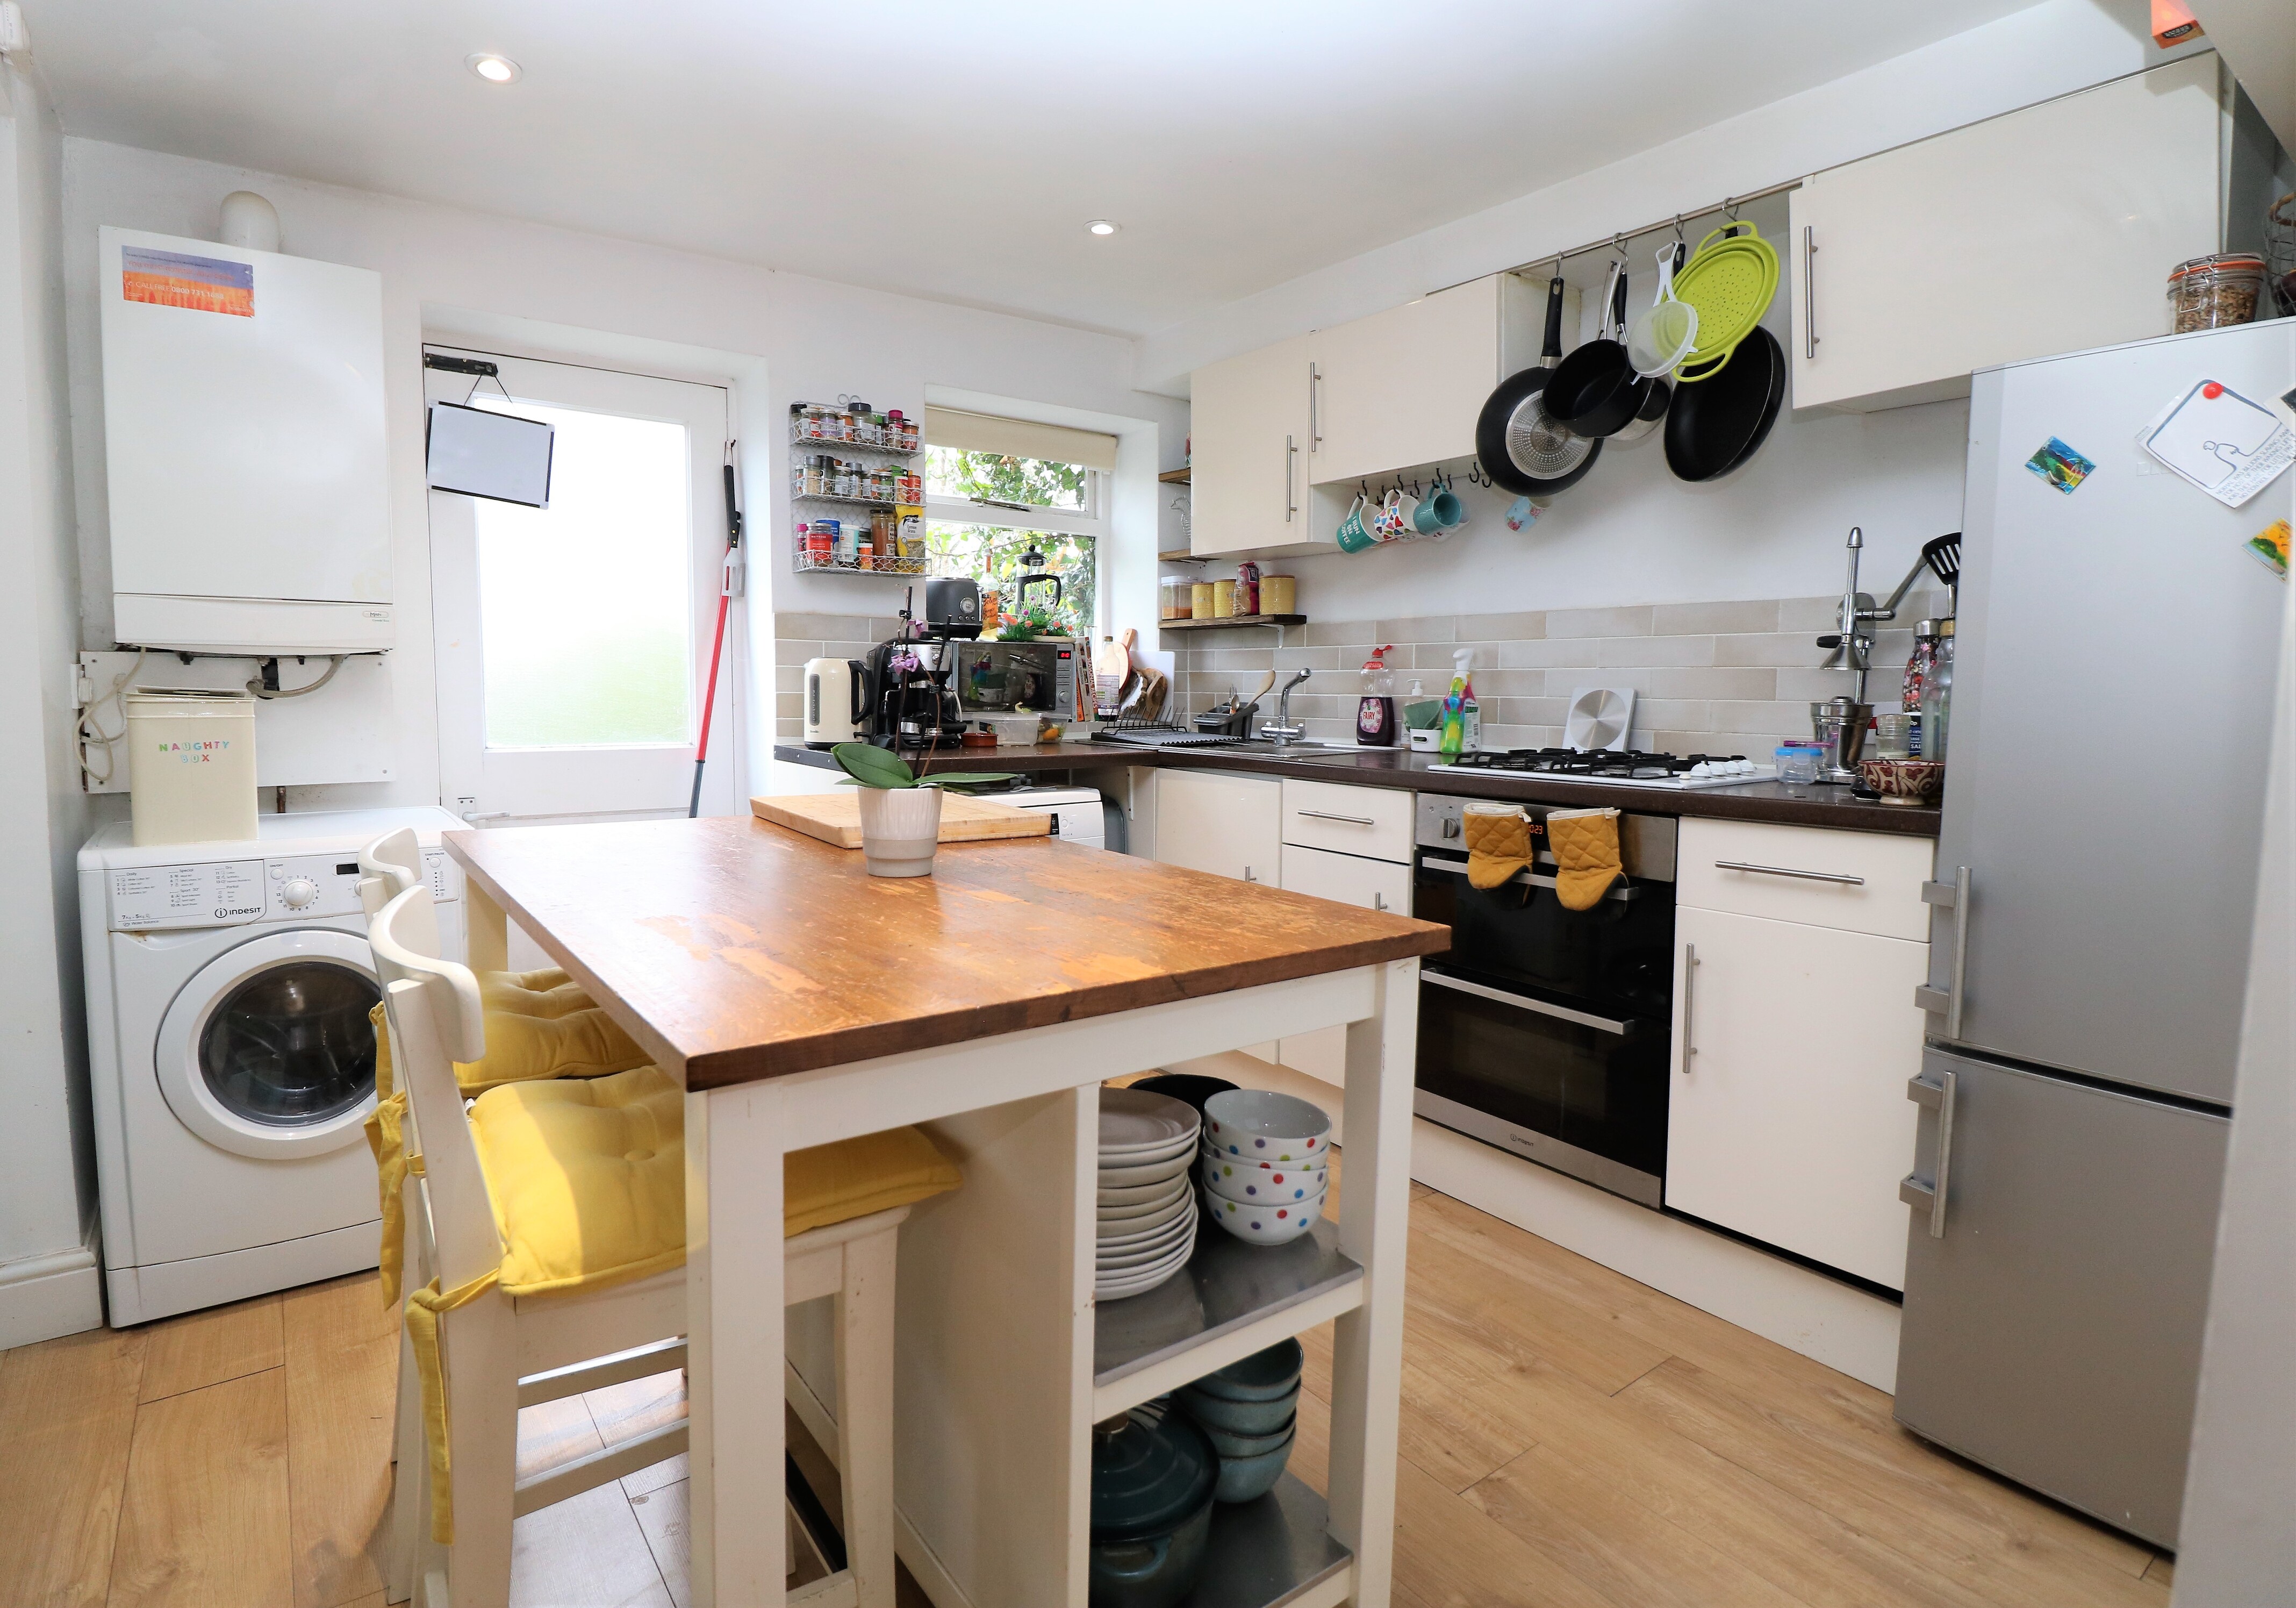 Ground floor flat in N4. Two bedrooms and spacious open plan kitchen and reception room leading out to glorious south facing garden.